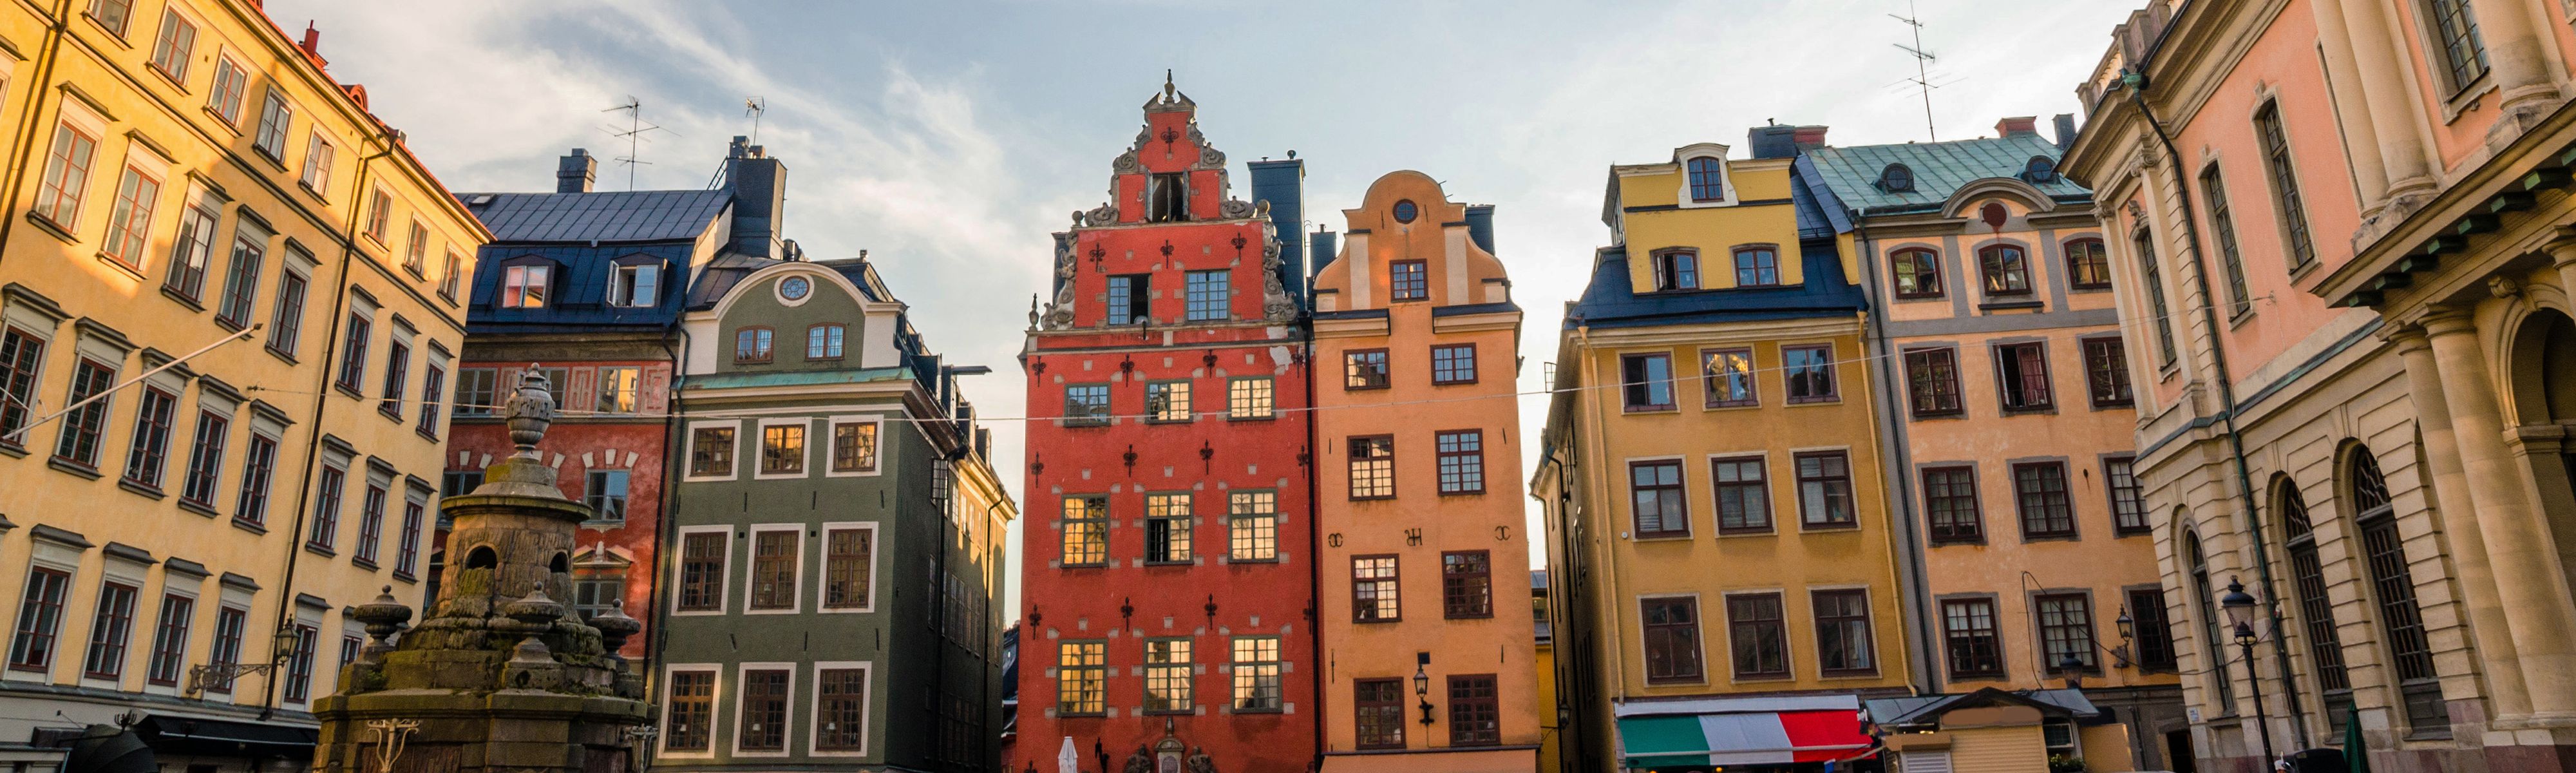 colored buildings in town square in sweden